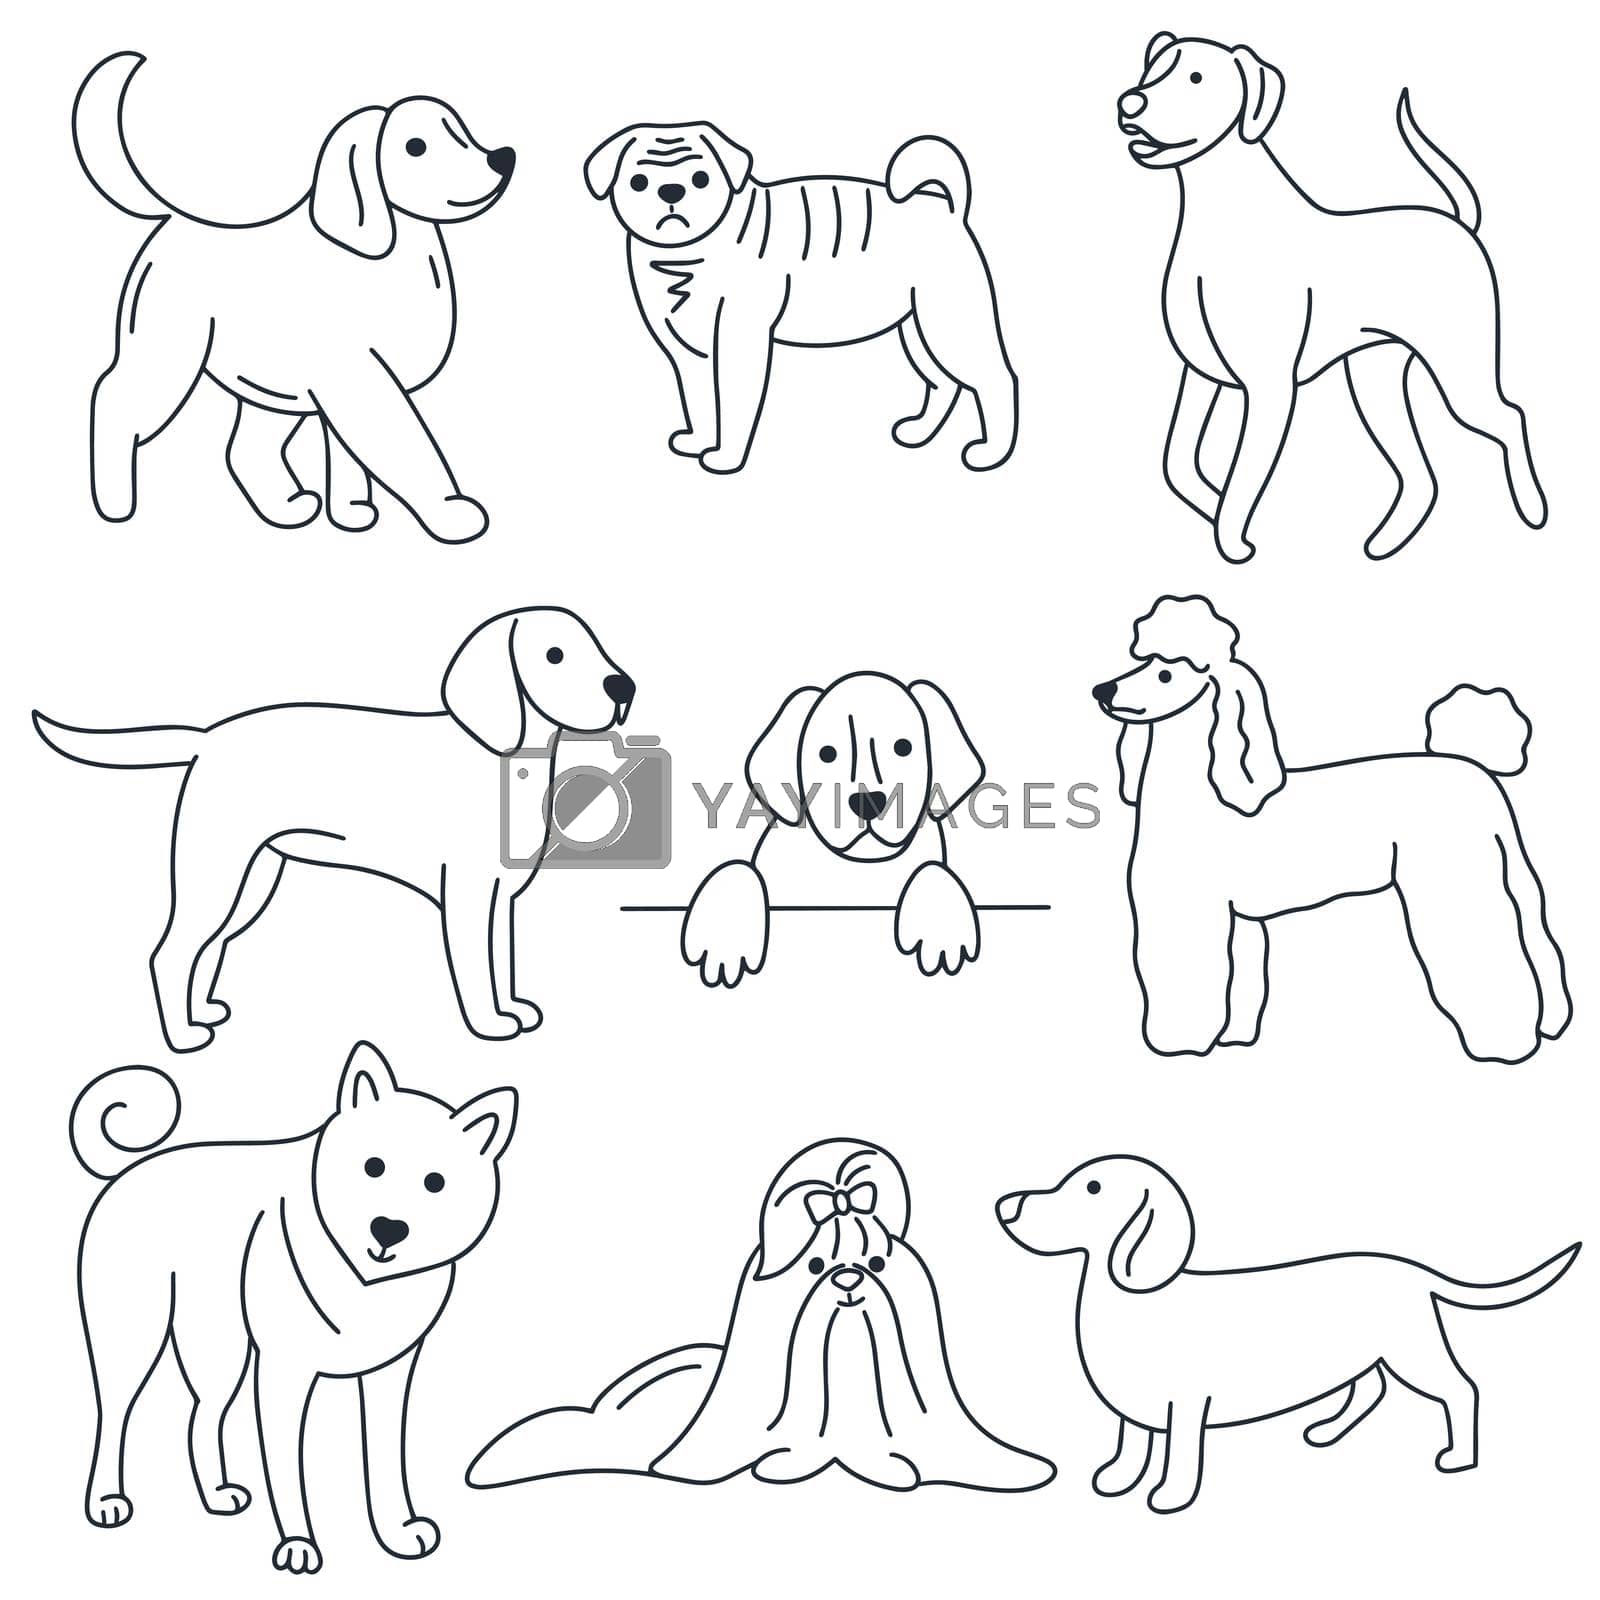 Dogs doodle set. Pets hand drawn collection. Outline drawing animals isolated vector illustration